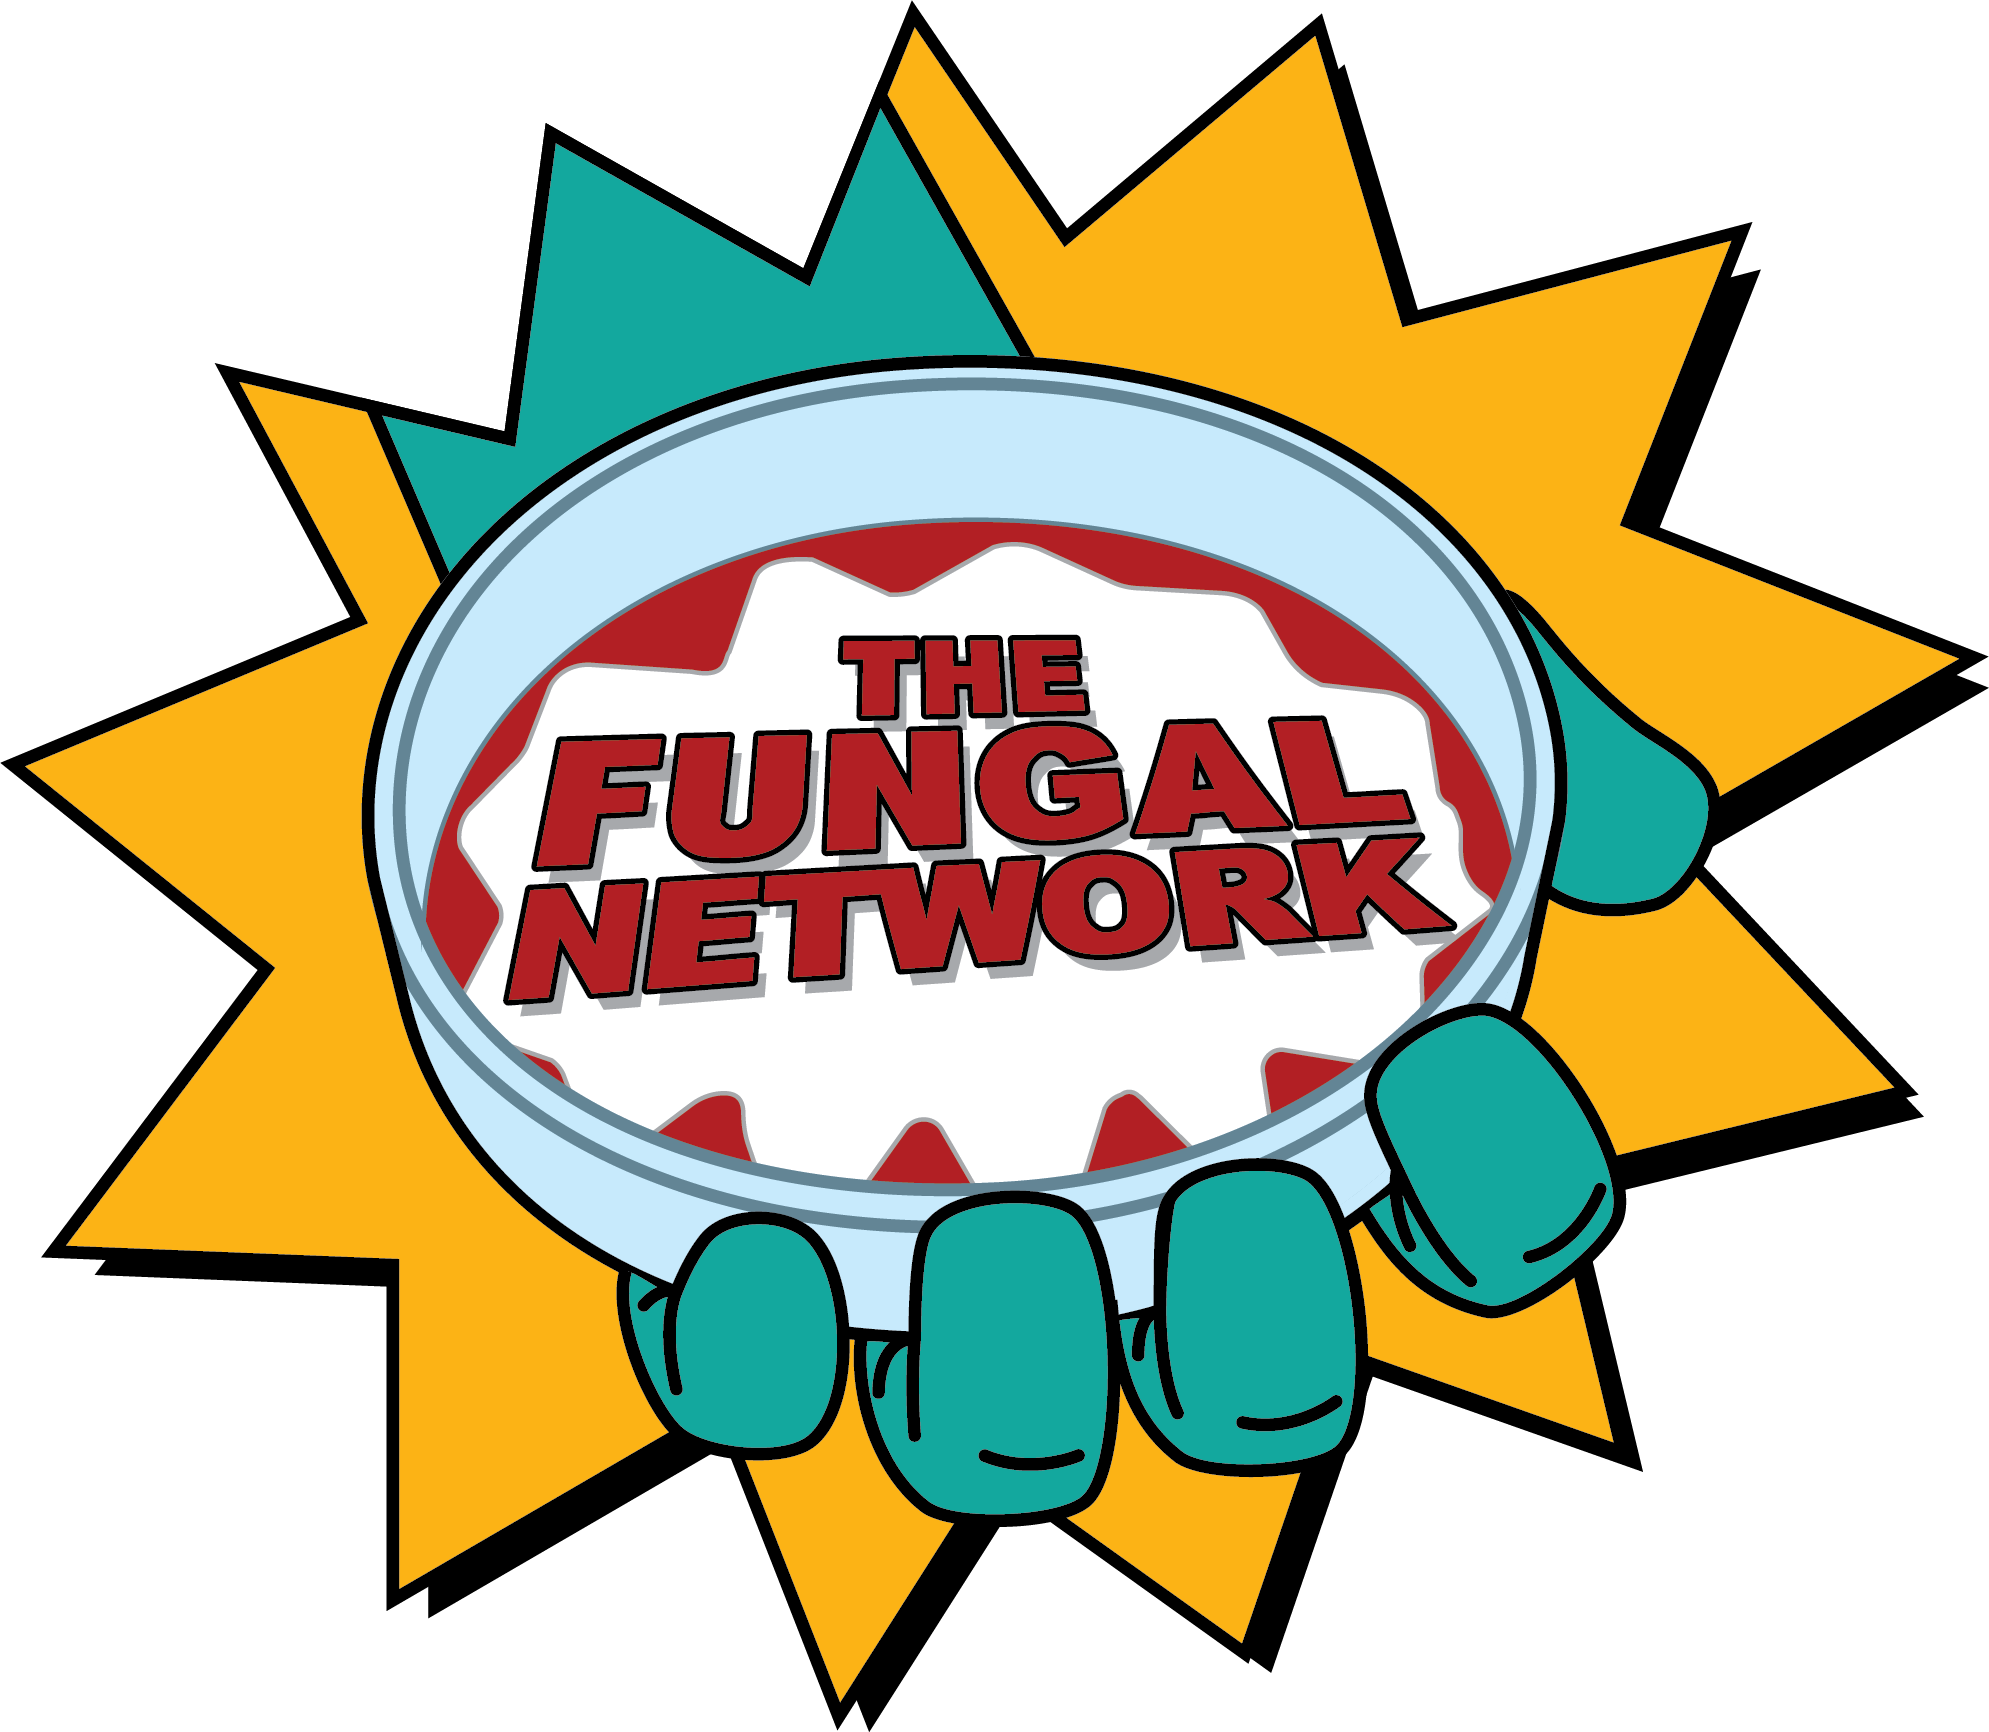 The Fungal Network logo